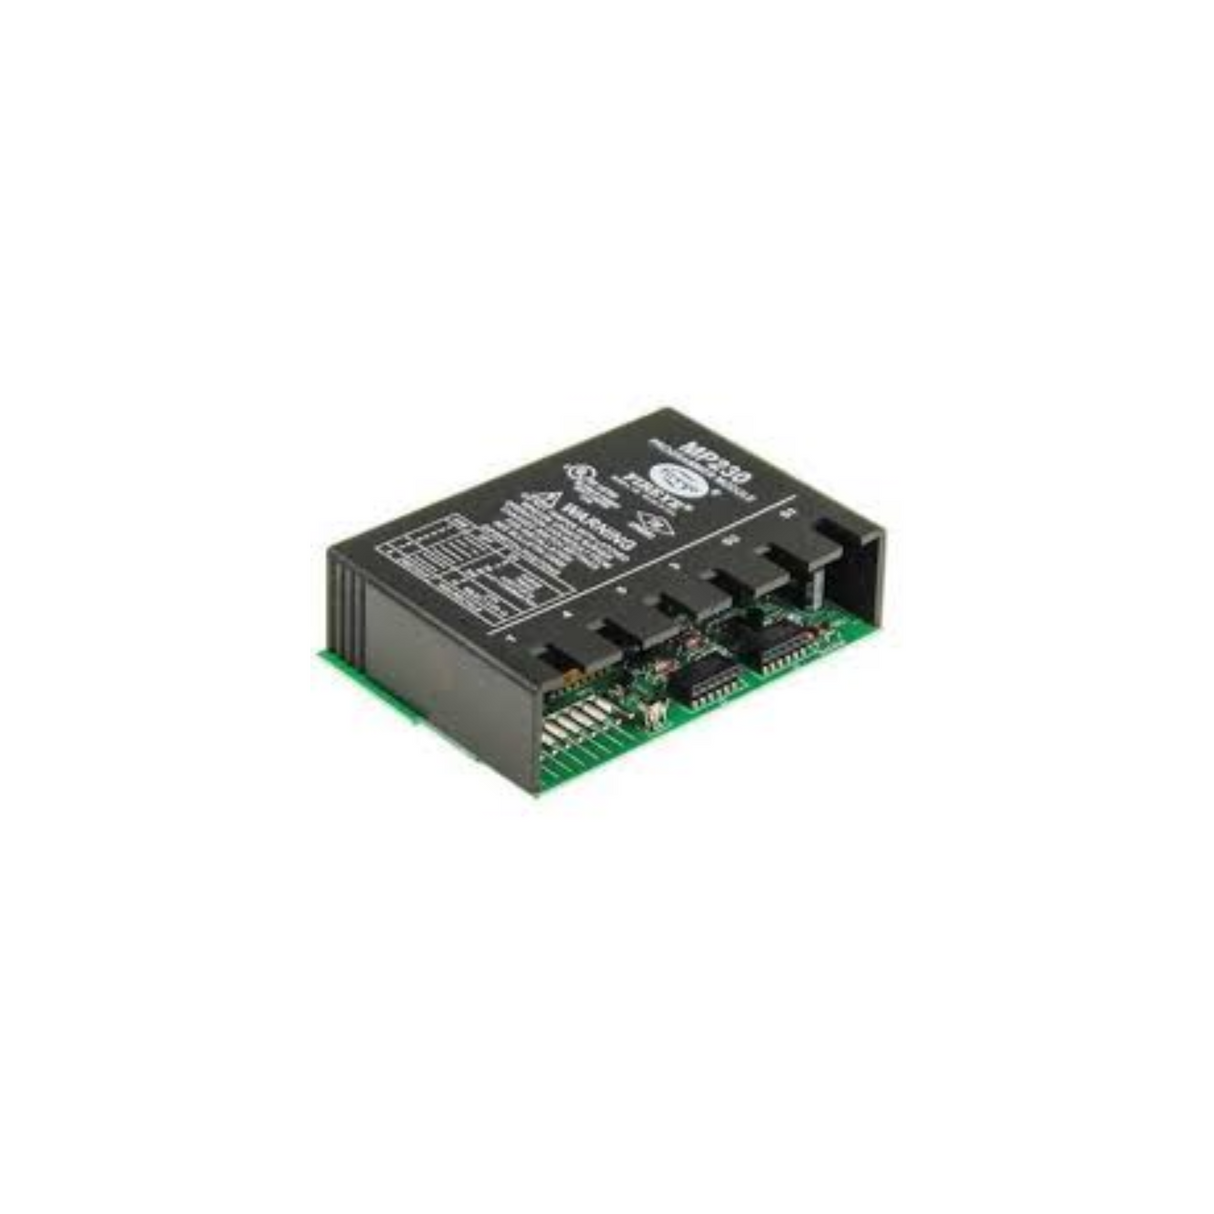 Fireye MP230 Programmer Module, Selectable Recycle/Non-Recycle